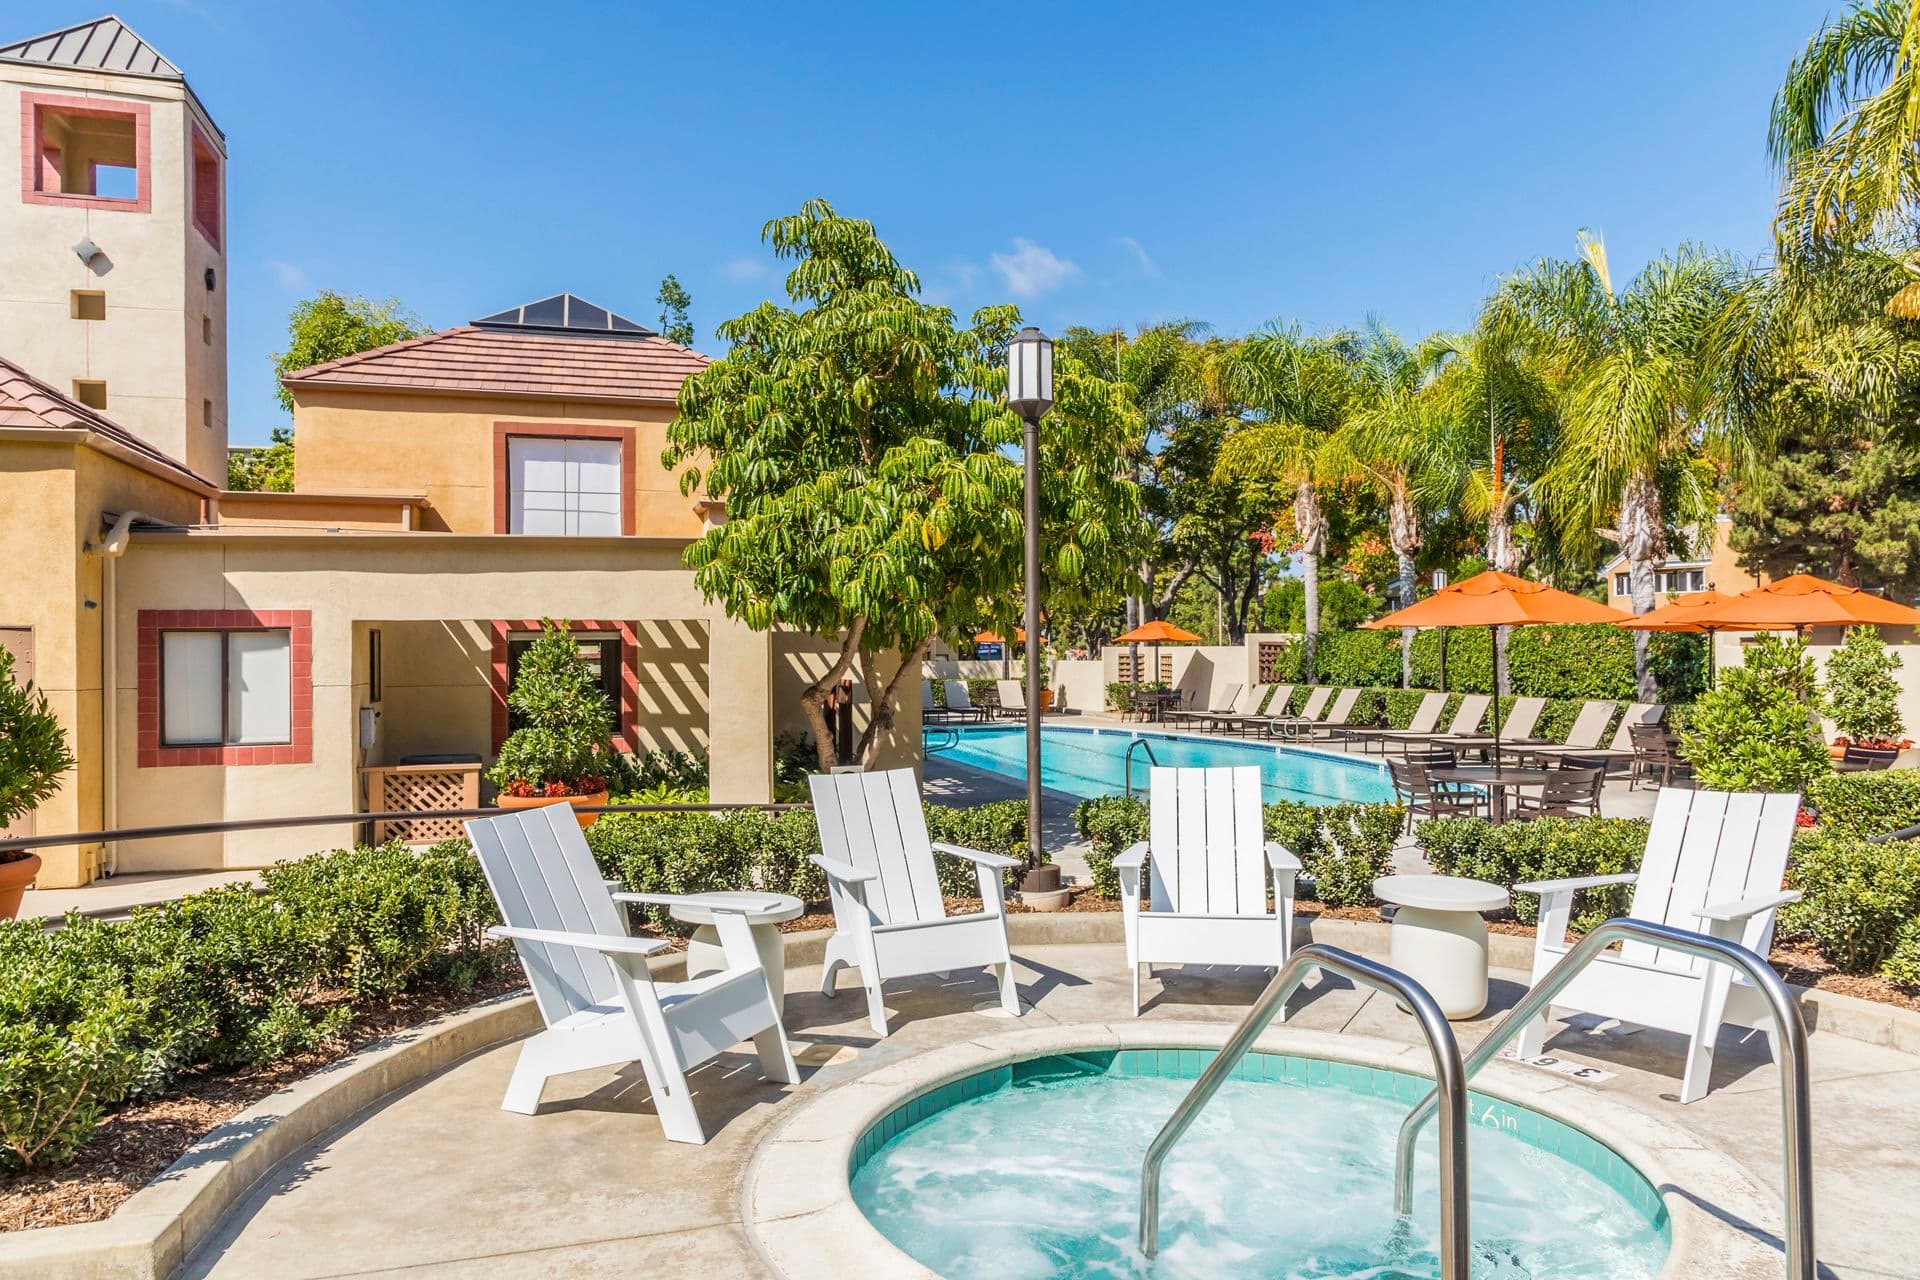 Pool and spa view at Dartmouth Court Apartment Homes at University Town Center in Irvine, CA.